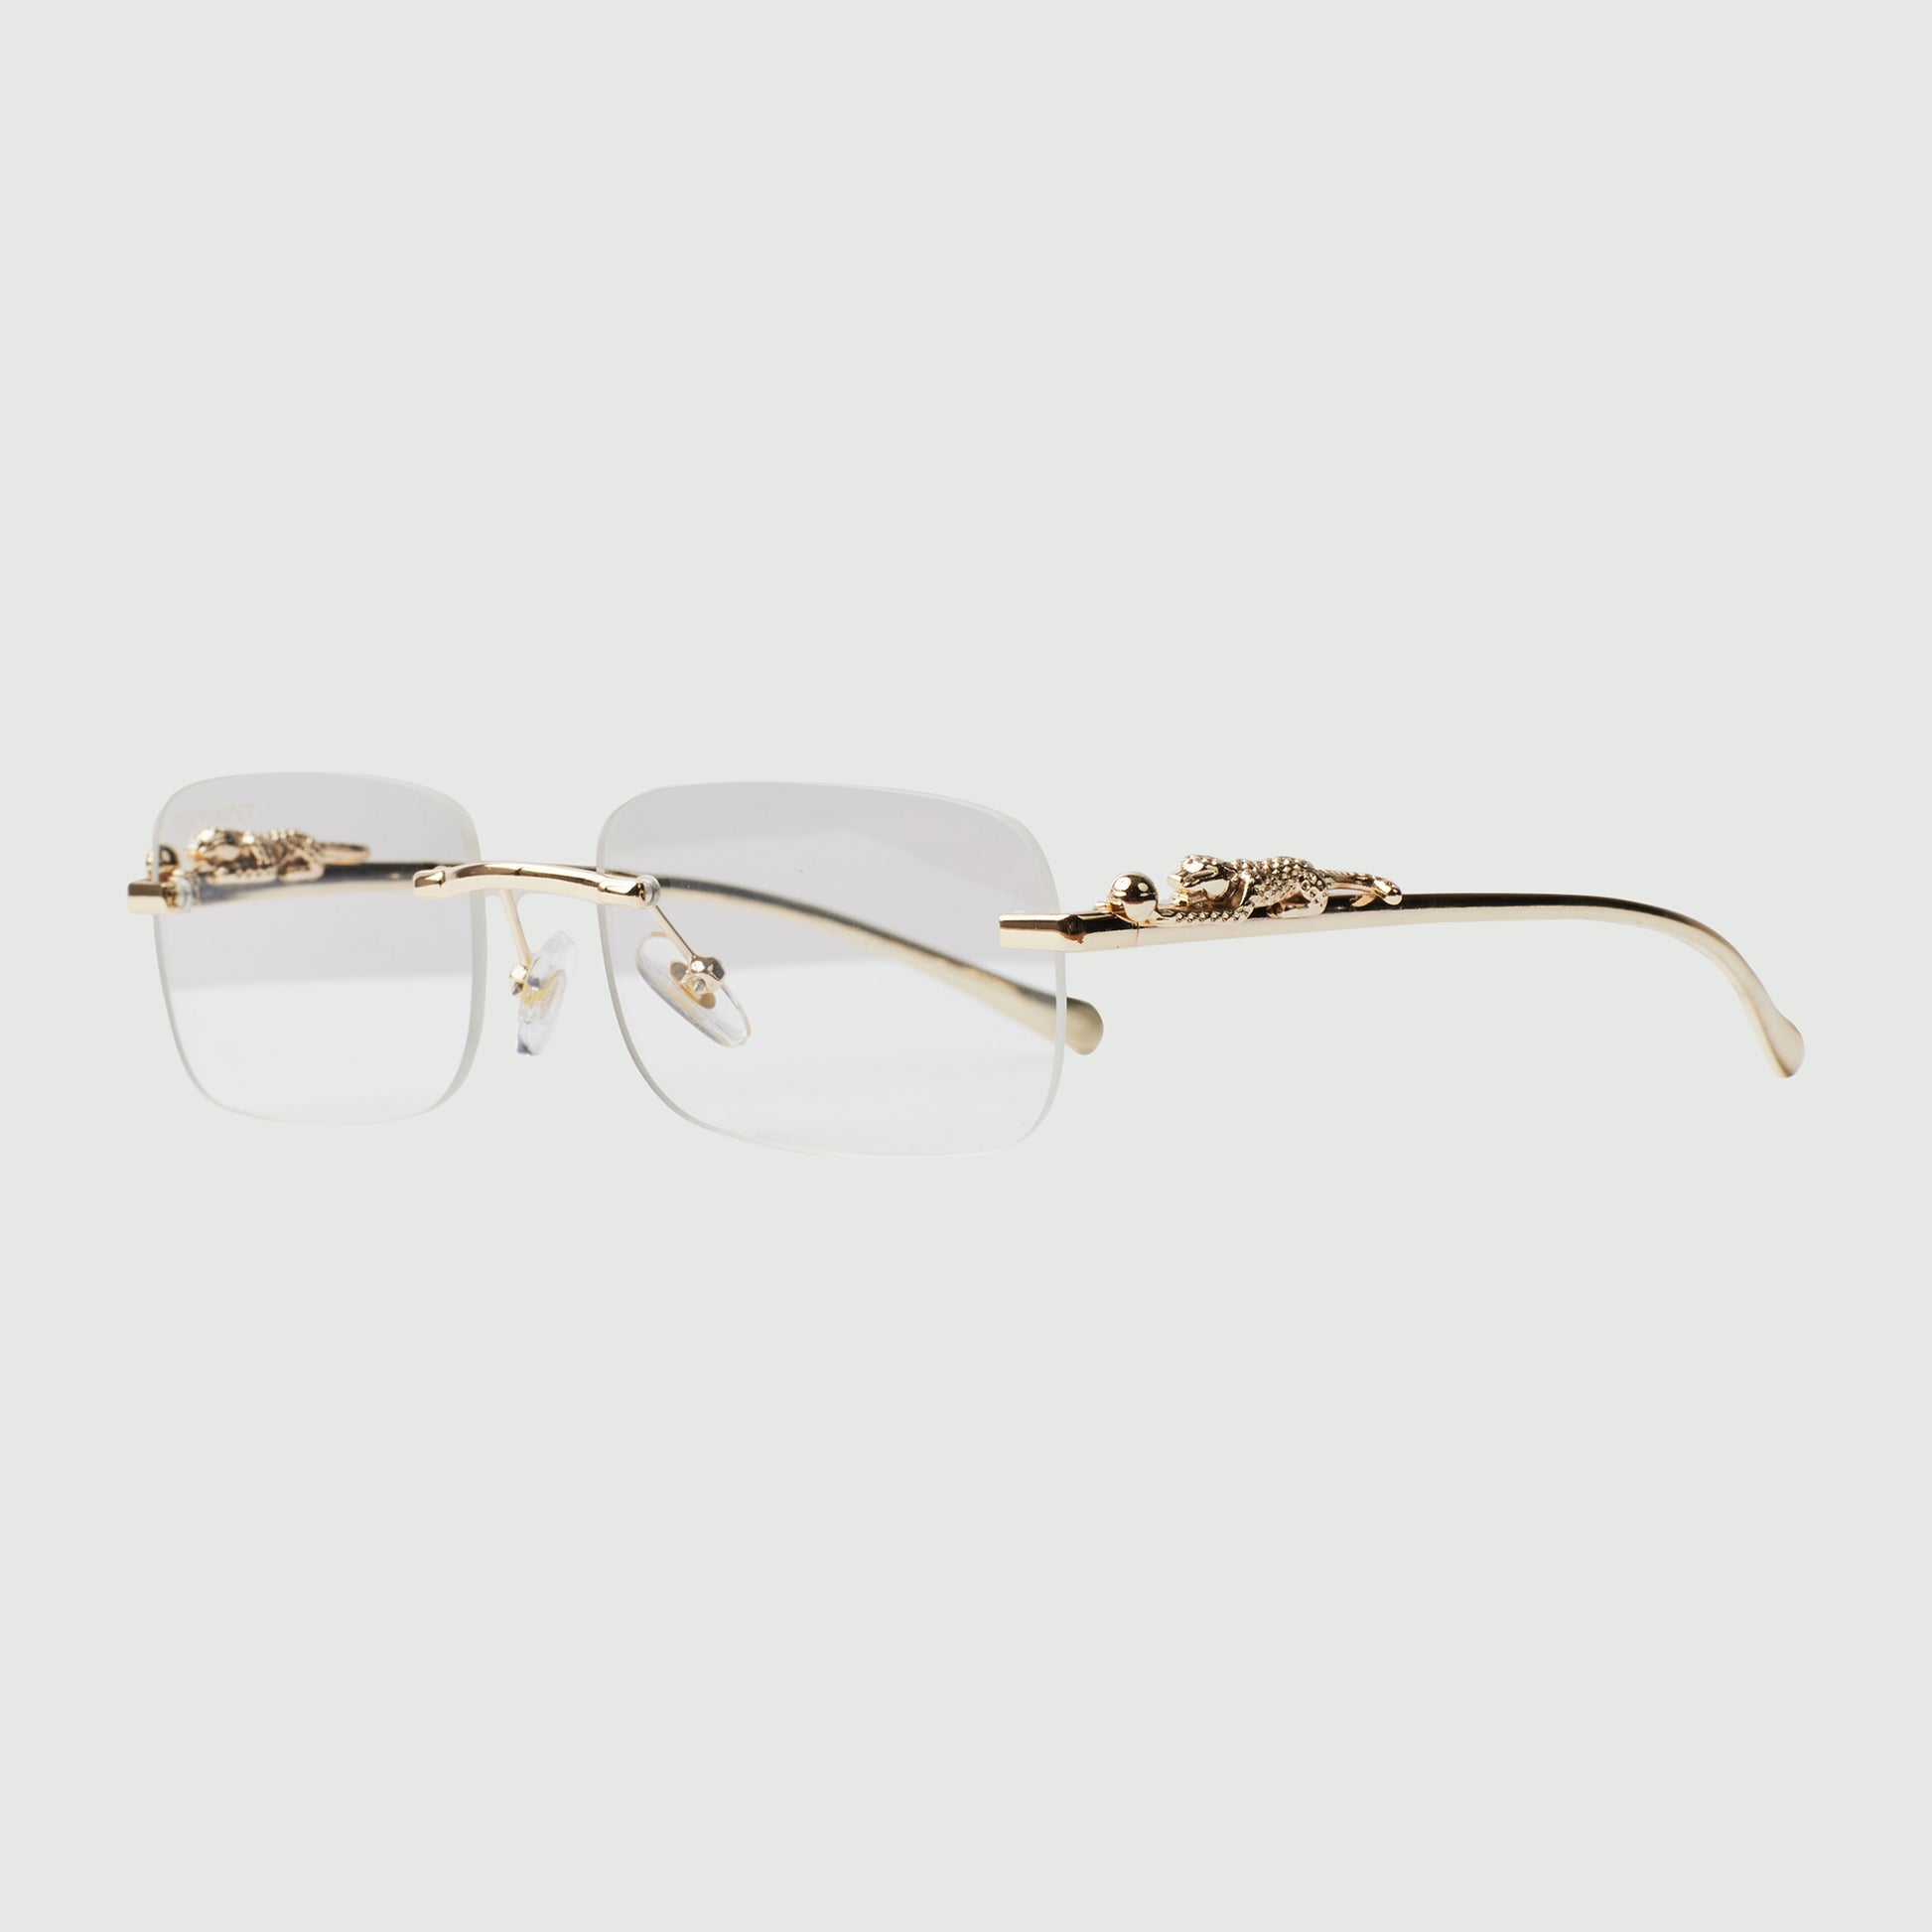 Panther Glasses - Gold / Clear - GVNMNT Clothing Co', European streetwear.